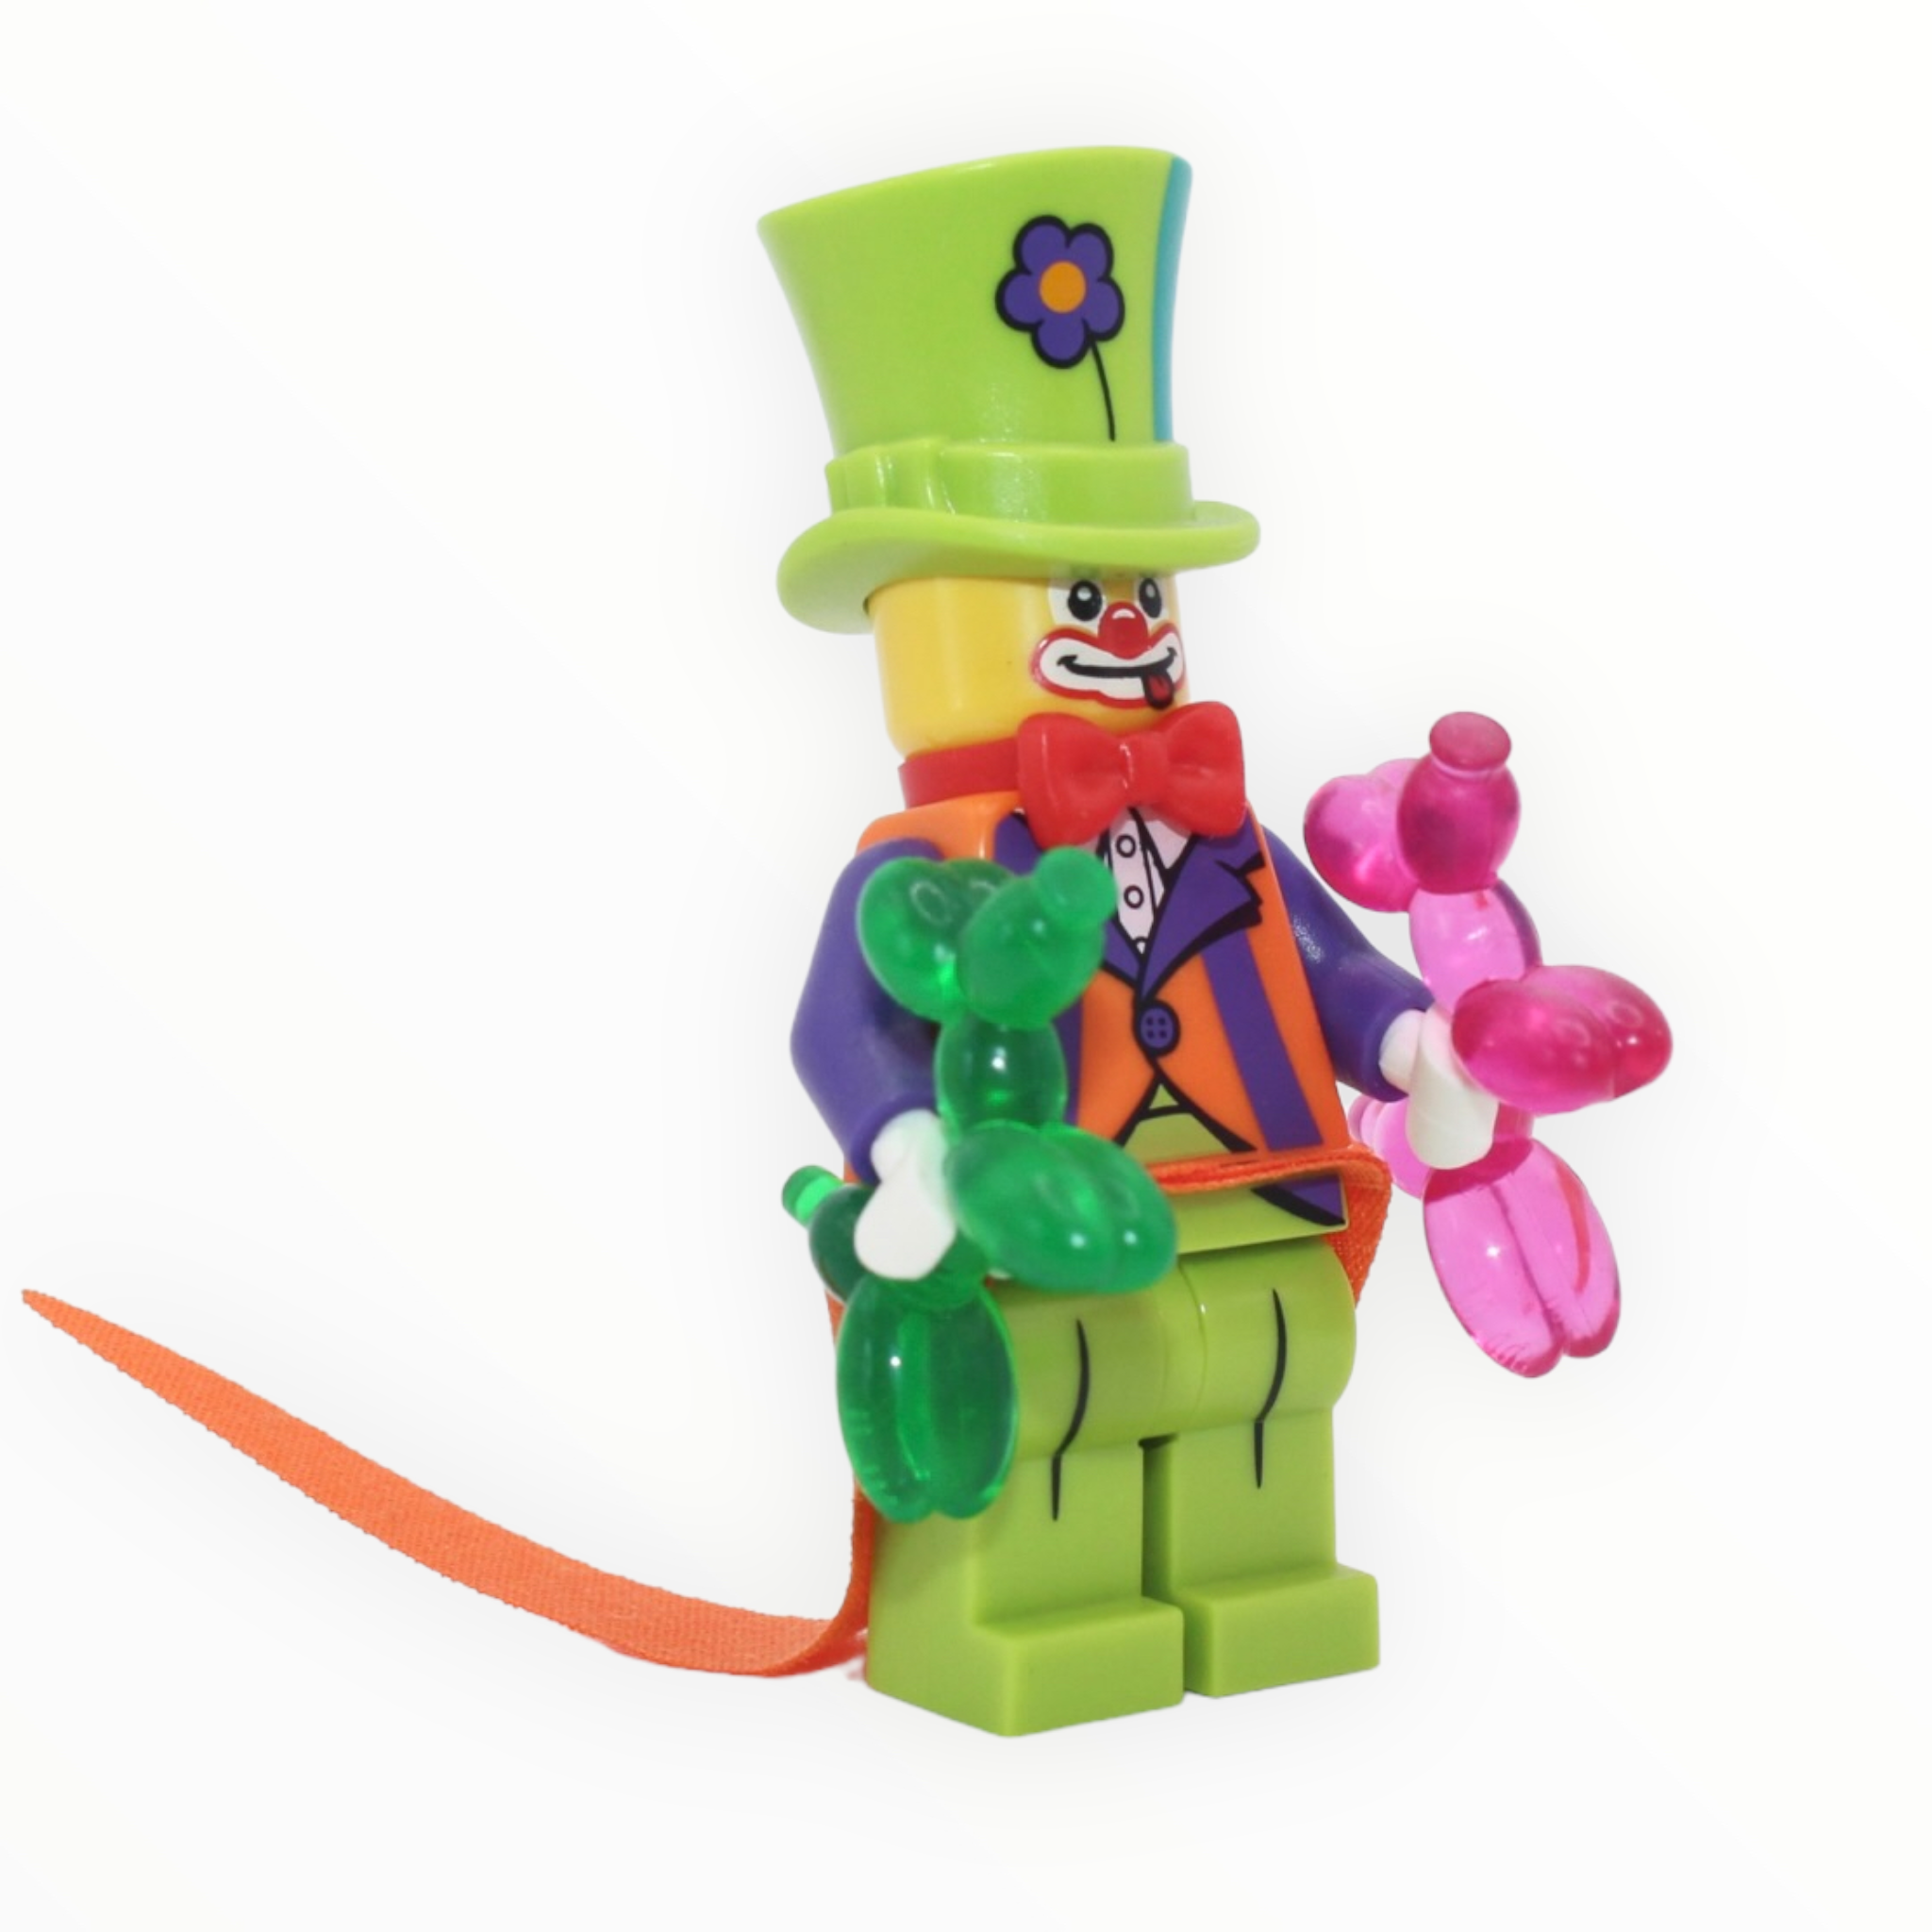 LEGO Series 18: Party Clown